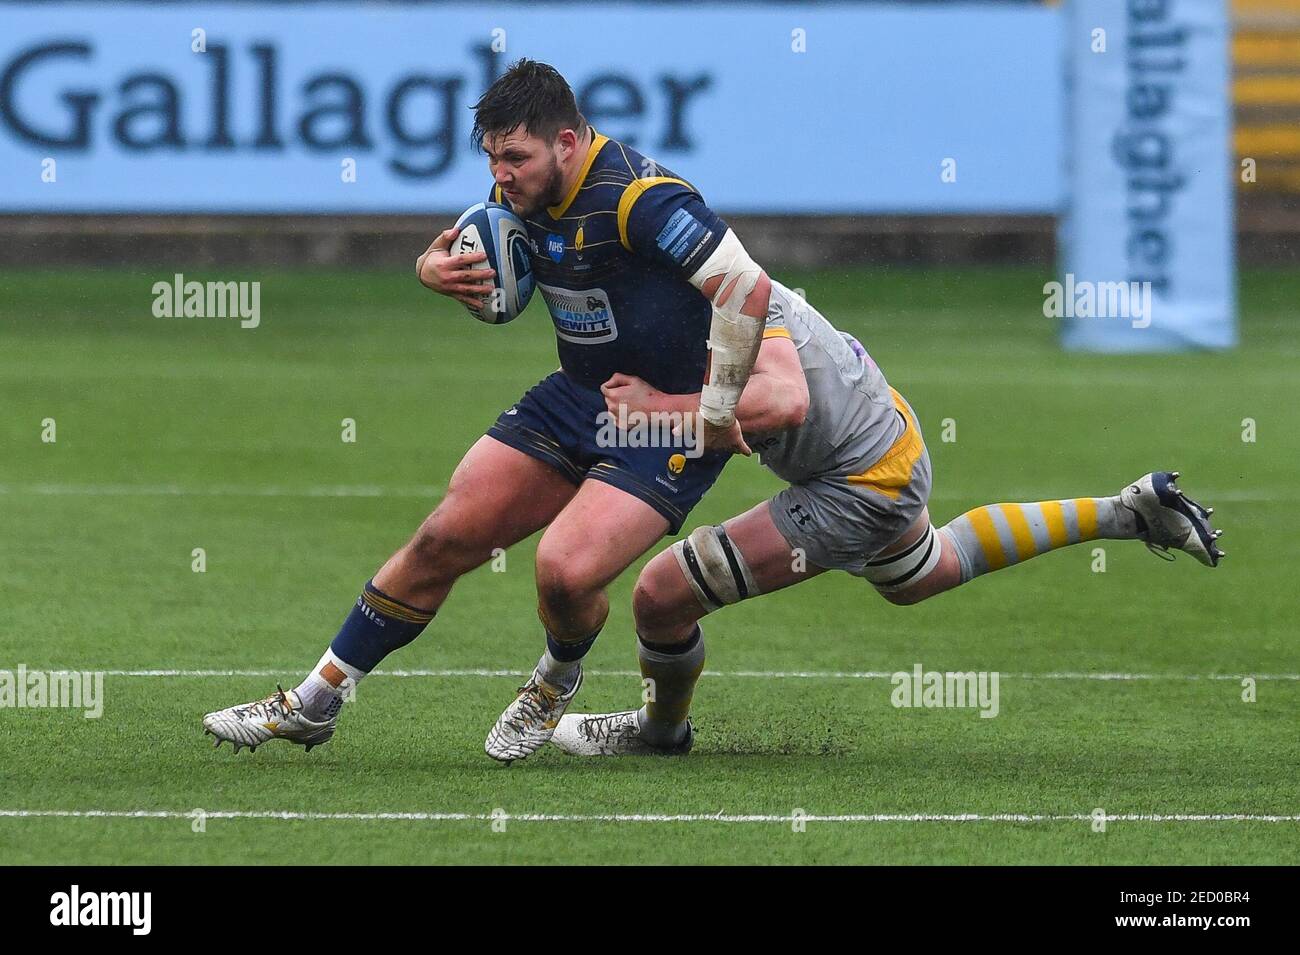 Worcester, UK. 14th Feb, 2021. Ethan Waller of Worcester Warriors is tackled by James Gaskell of Wasps in Worcester, UK on 2/14/2021. (Photo by Craig Thomas/News Images/Sipa USA) Credit: Sipa USA/Alamy Live News Stock Photo